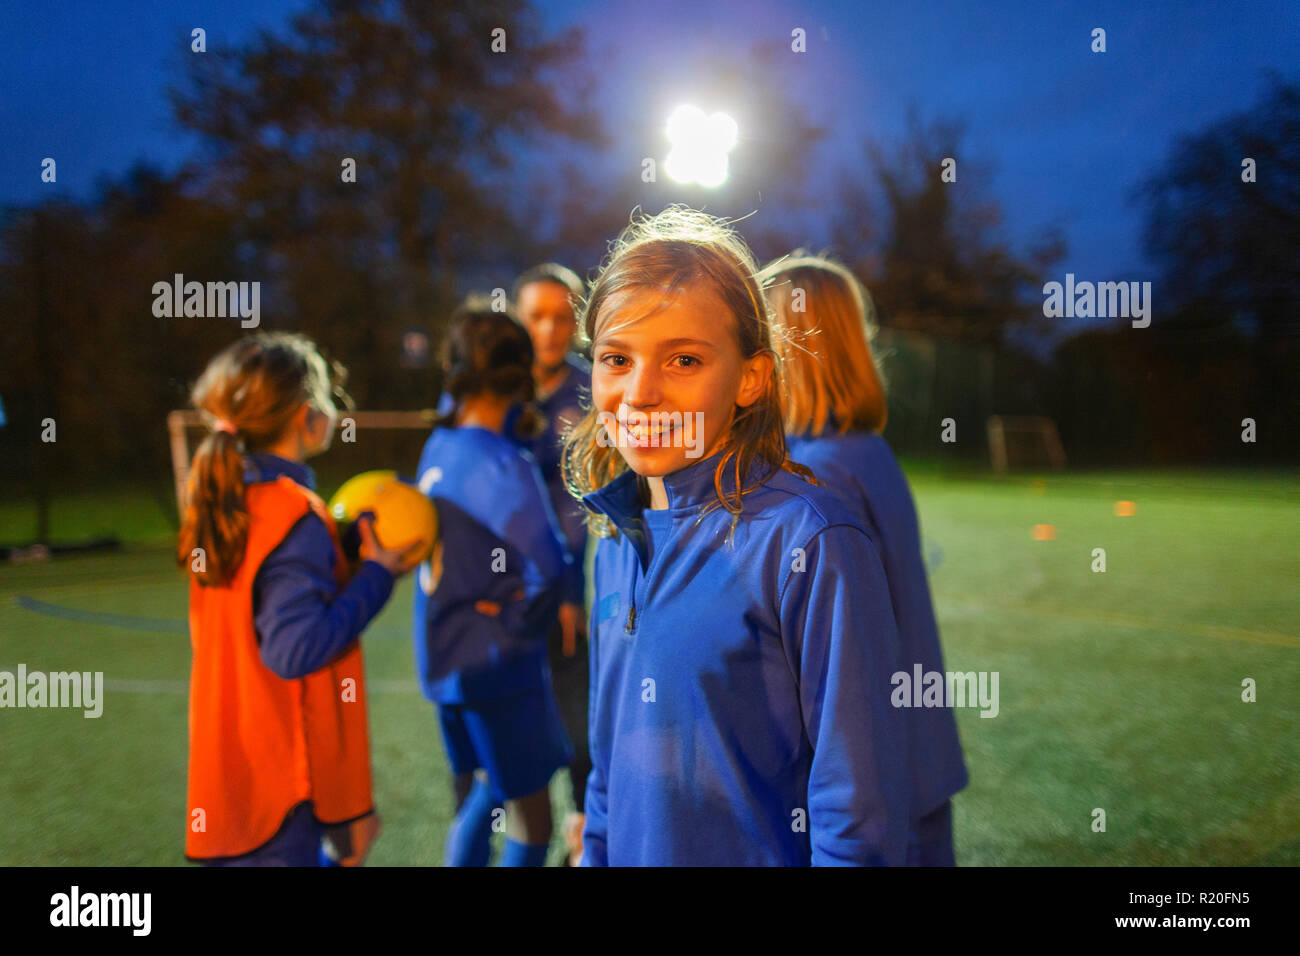 Portrait smiling, confident girl soccer player on field at night Stock Photo